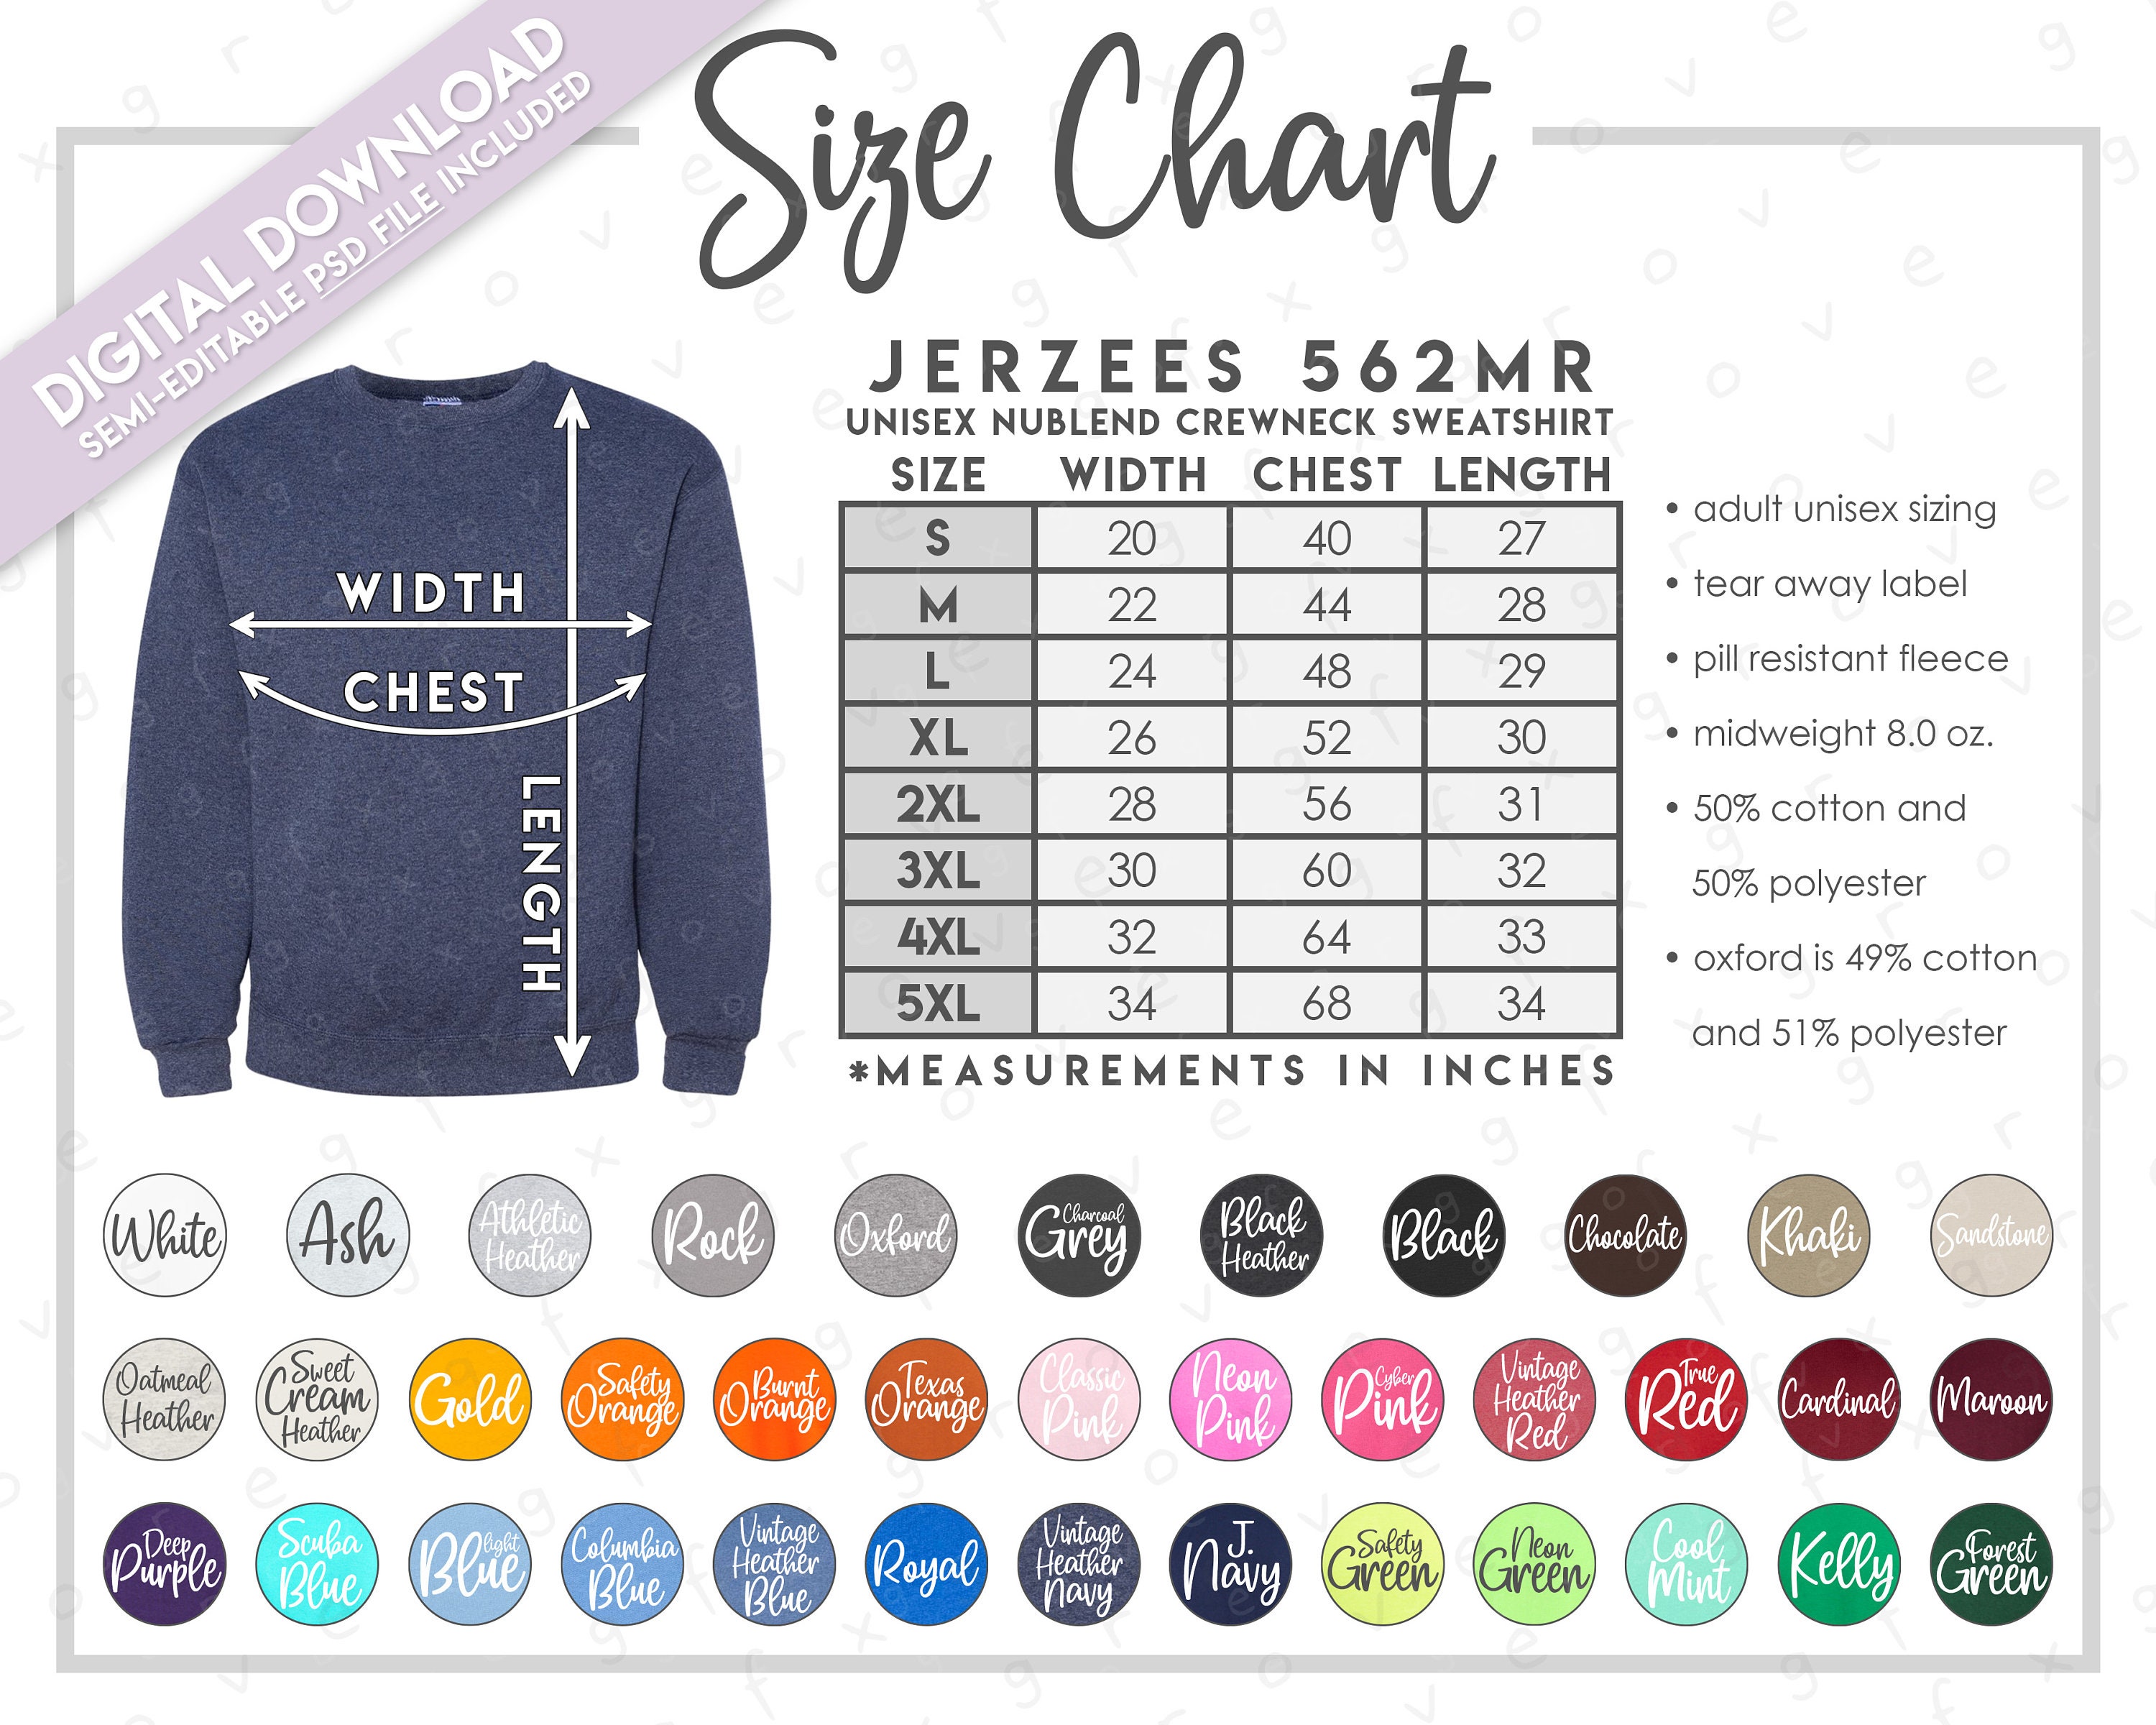 Jerzees 562MR Editable Color Chart And Size Chart | canoeracing.org.uk